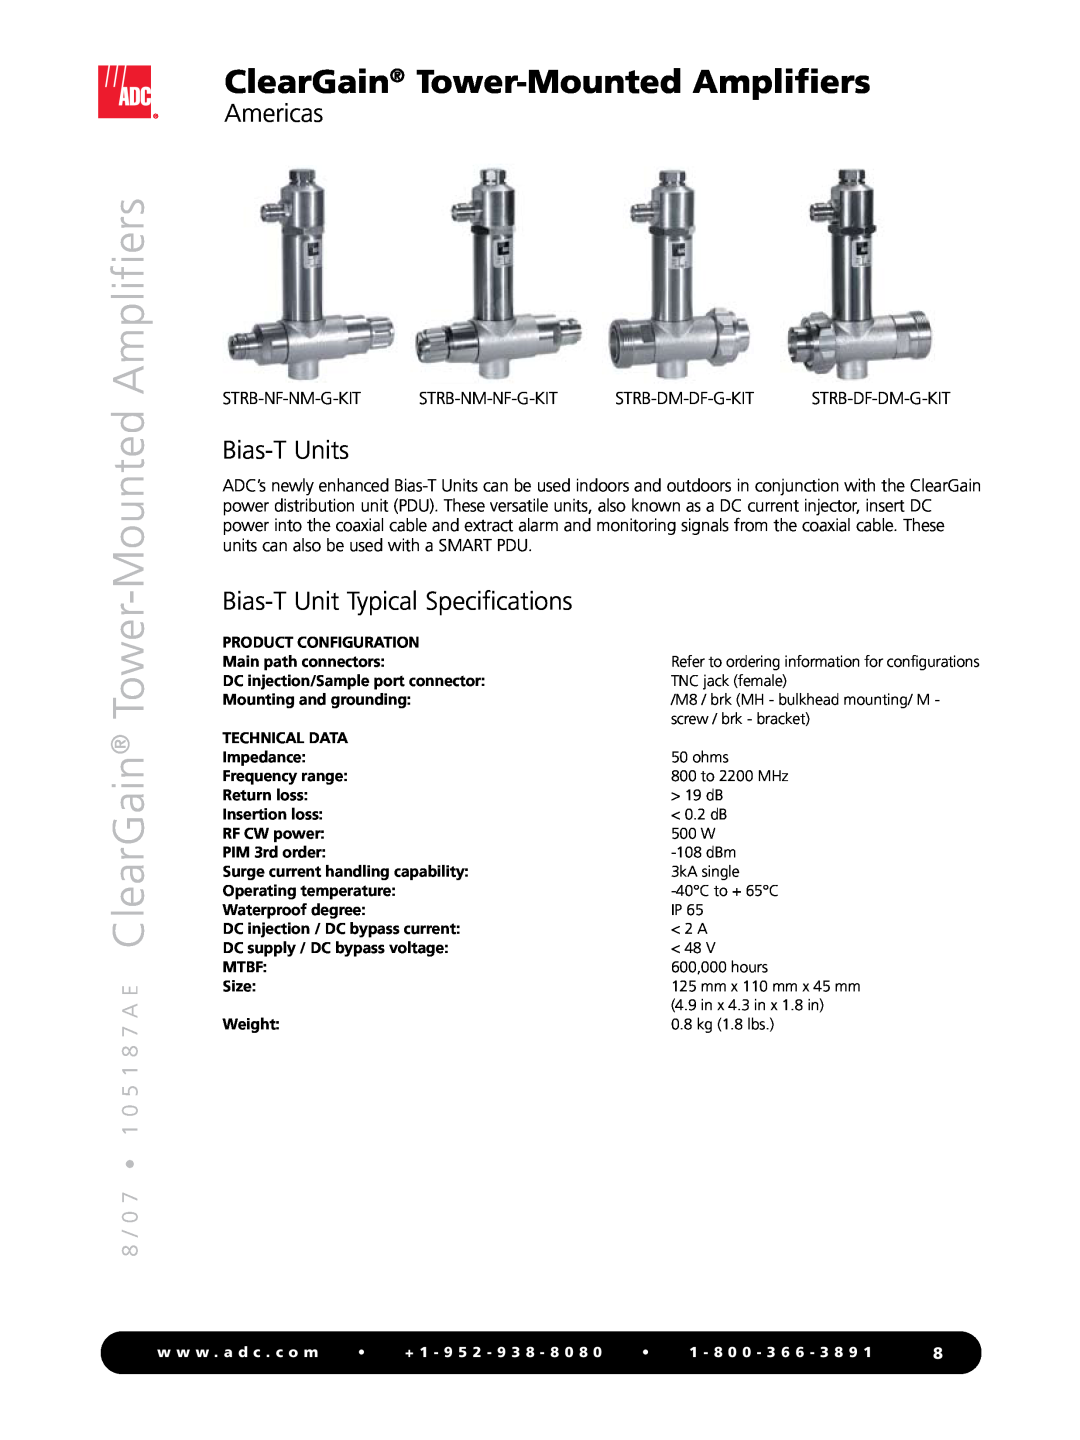 ADC Tower-Mounted Amplifiers Bias-TUnits, Bias-TUnit Typical Specifications, ClearGain Tower-MountedAmplifiers, Americas 